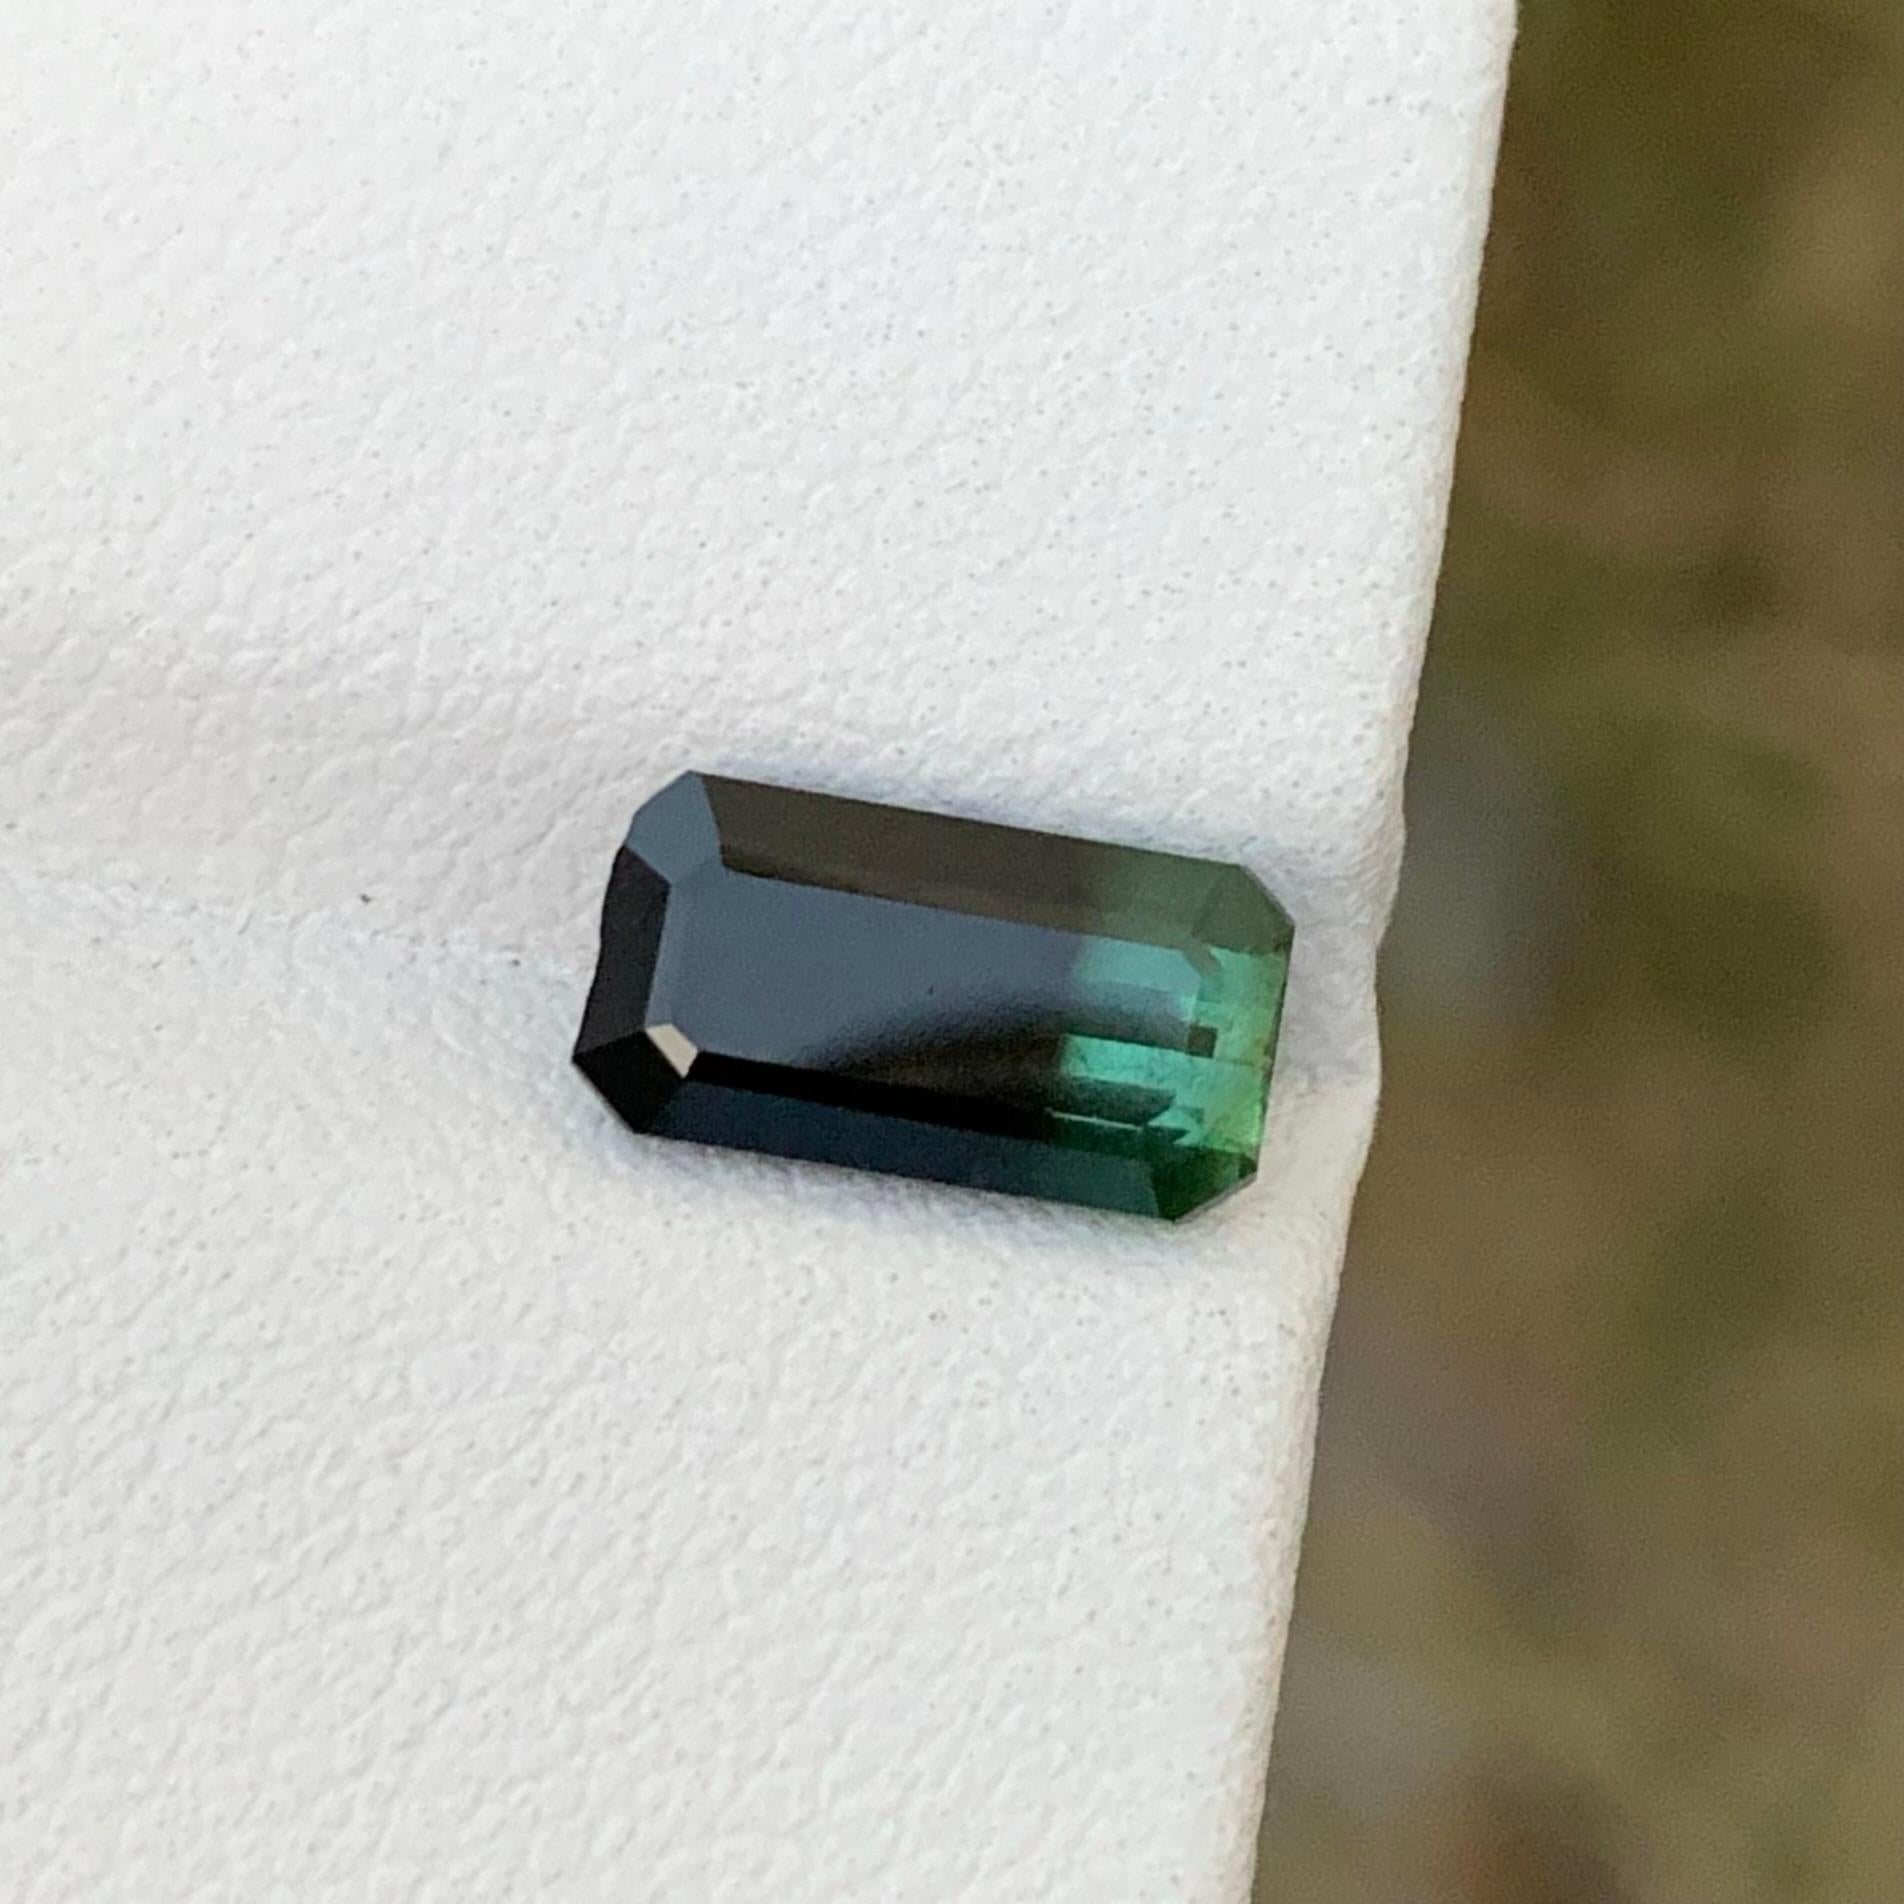 Loose Tourmaline 
Weight: 1.95 Carats 
Dimension: 9.8x5.2x4.3 Mm
Origin; Skardu Pakistan 
Shape: Emerald 
Color: Green & Black
Treatment: Non
Bicolor tourmaline is a stunning gemstone known for its unique and captivating coloration. This remarkable